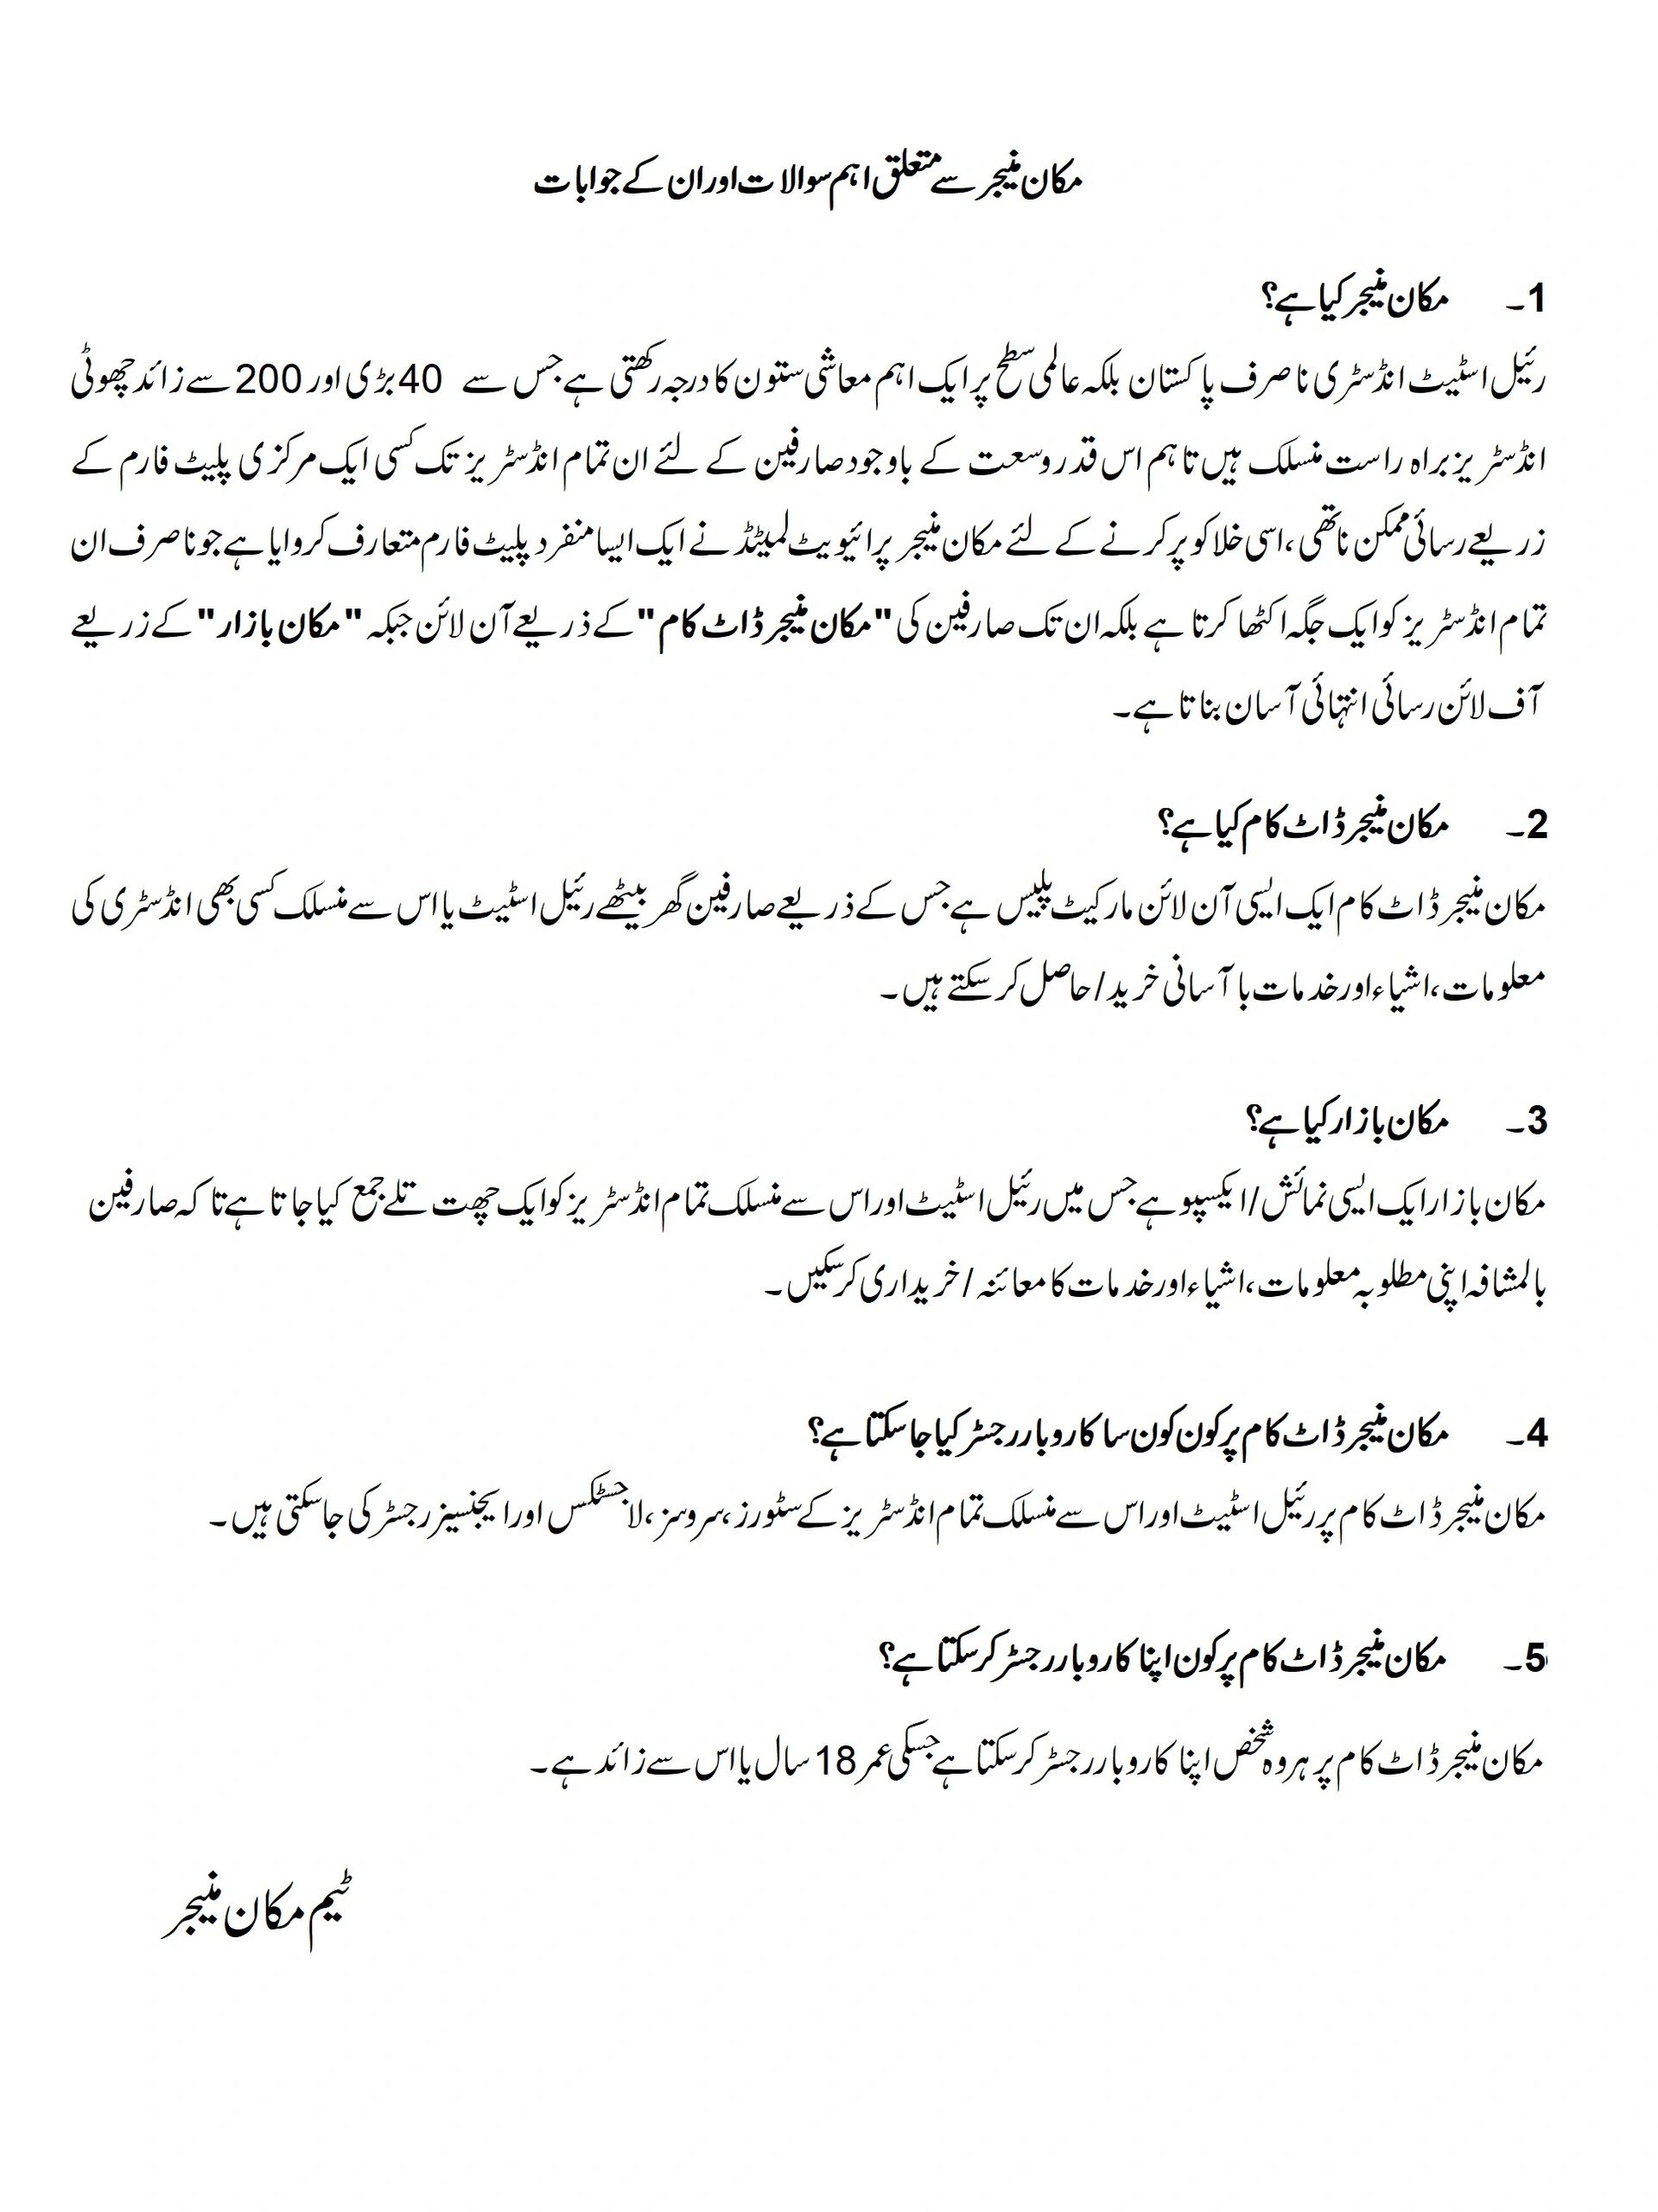 frequently asked questions in Urdu